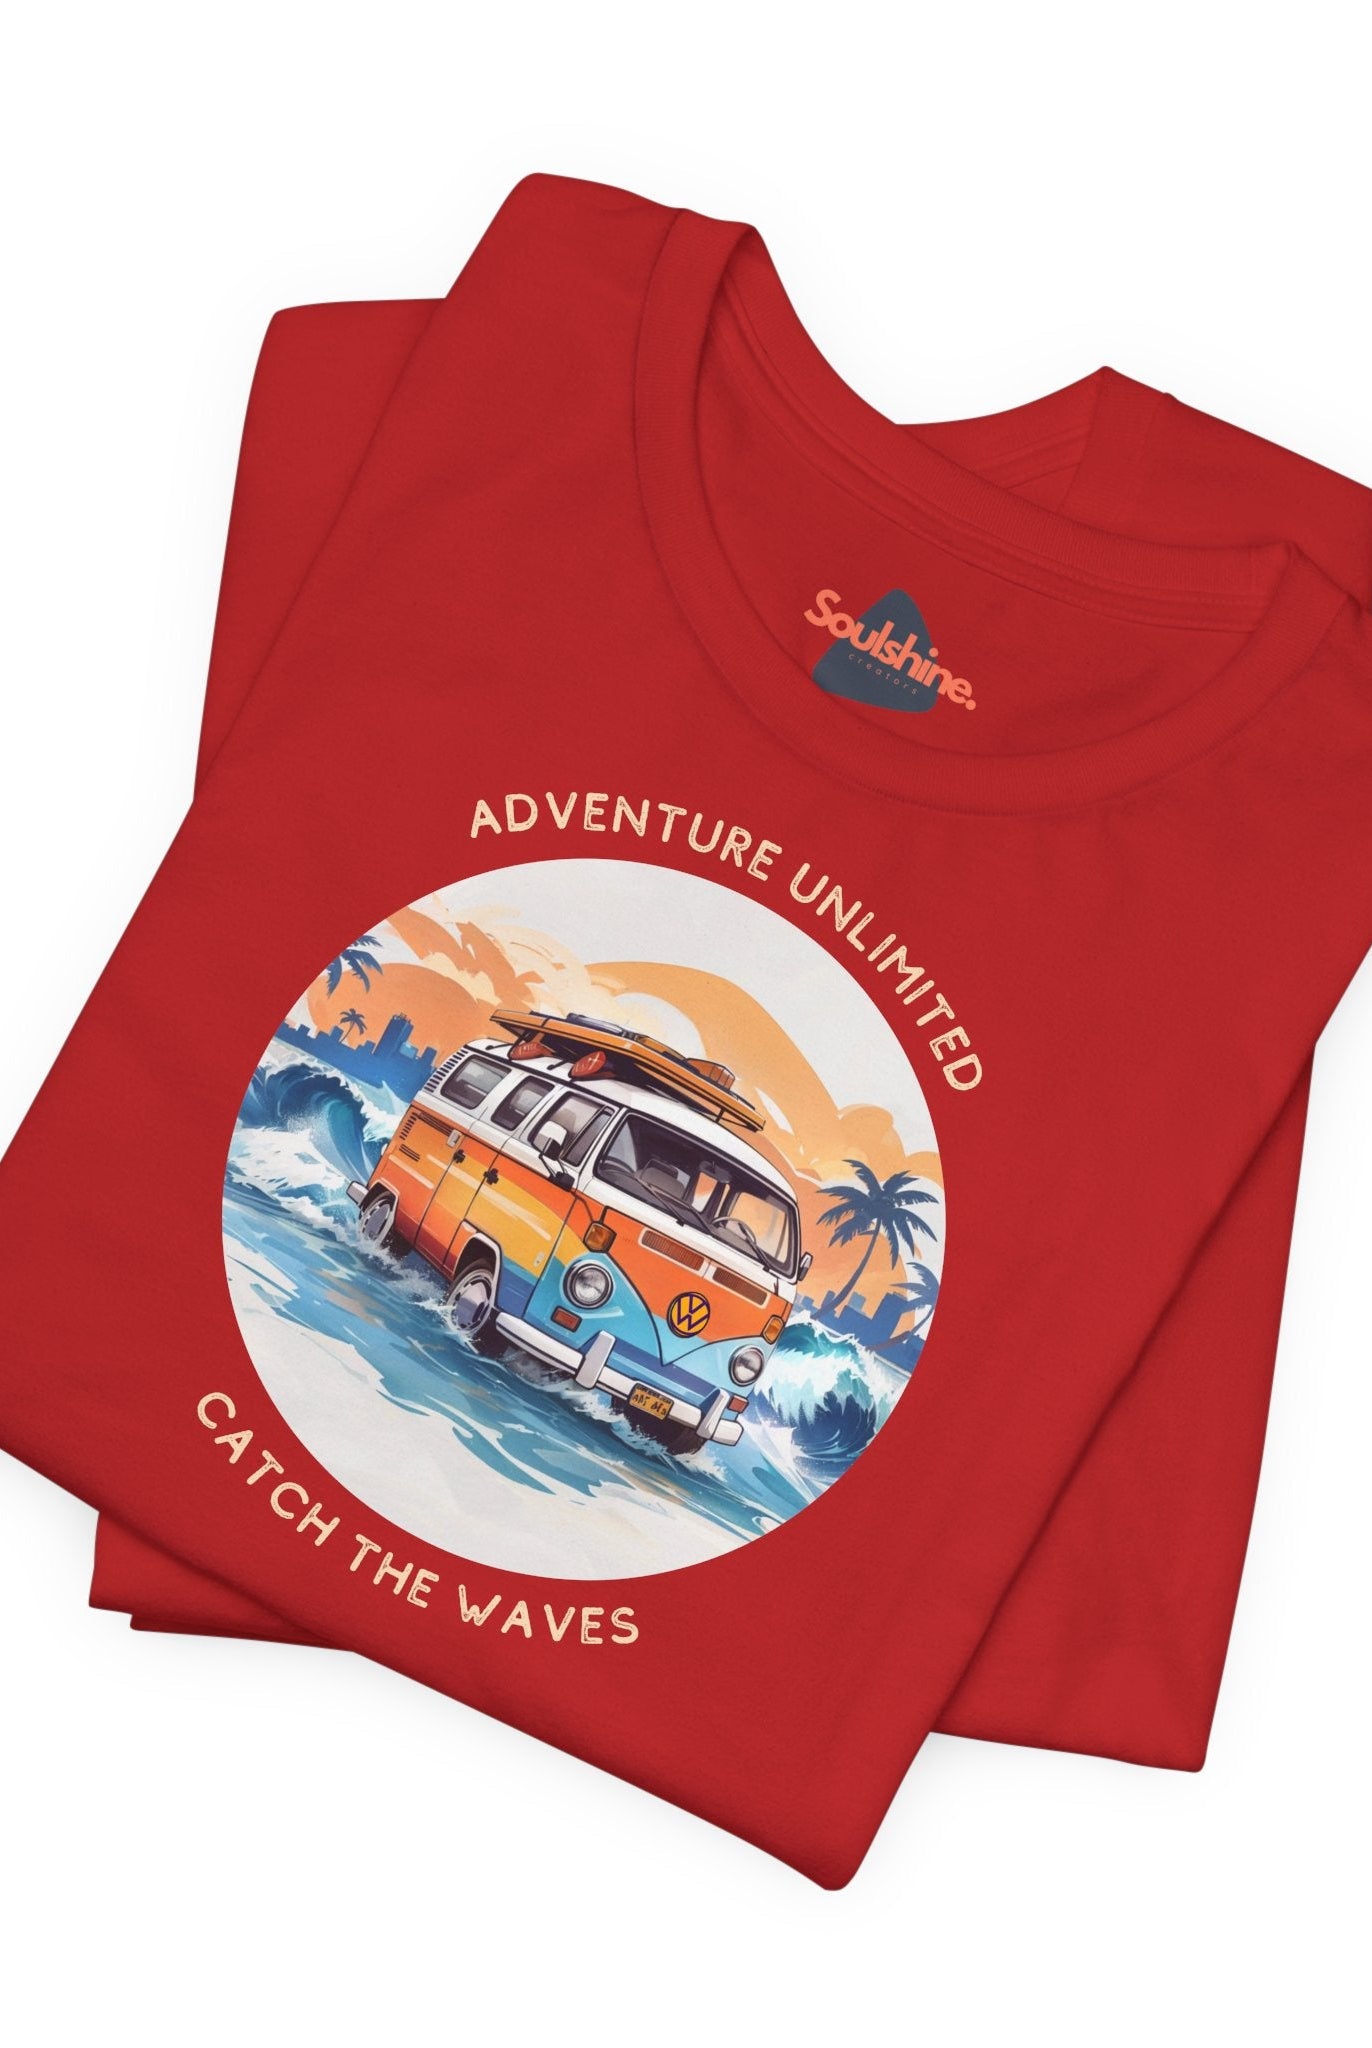 Red direct-to-garment printed surfing t-shirt with van in ocean